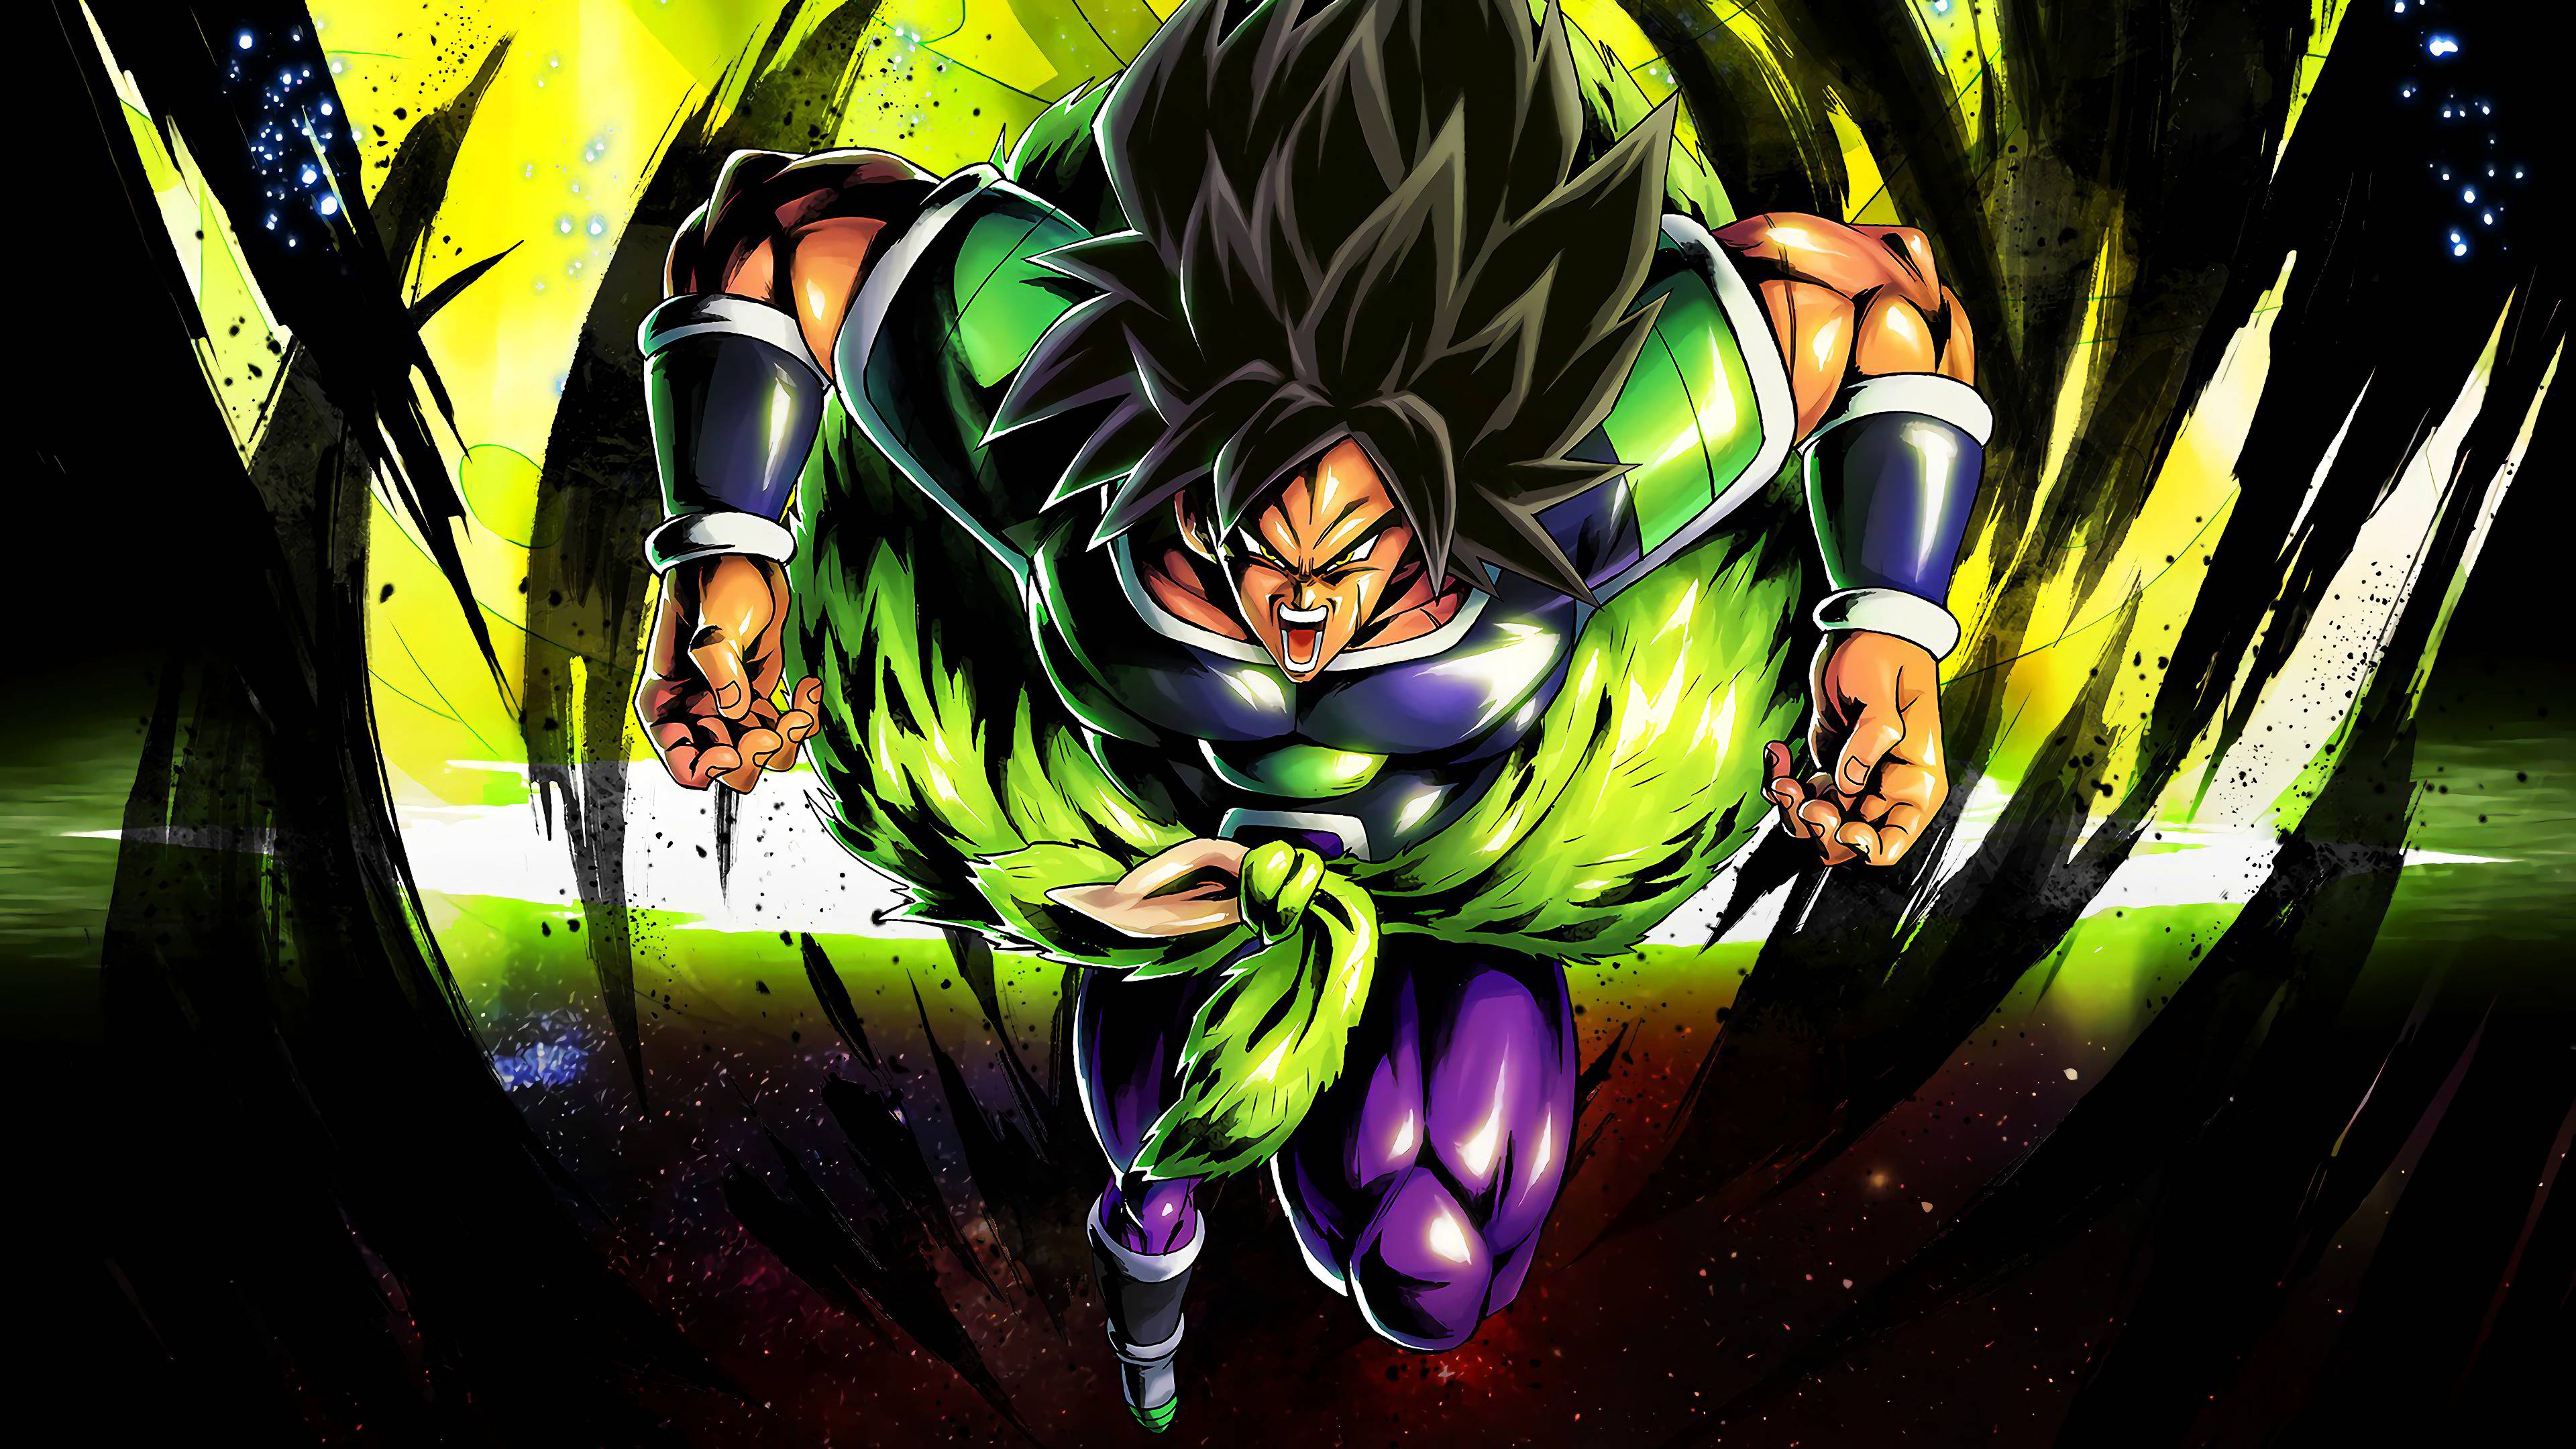 Dragon Ball Super Broly Wallpapers Top Free Dragon Ball Super Broly Backgrounds Wallpaperaccess 1977